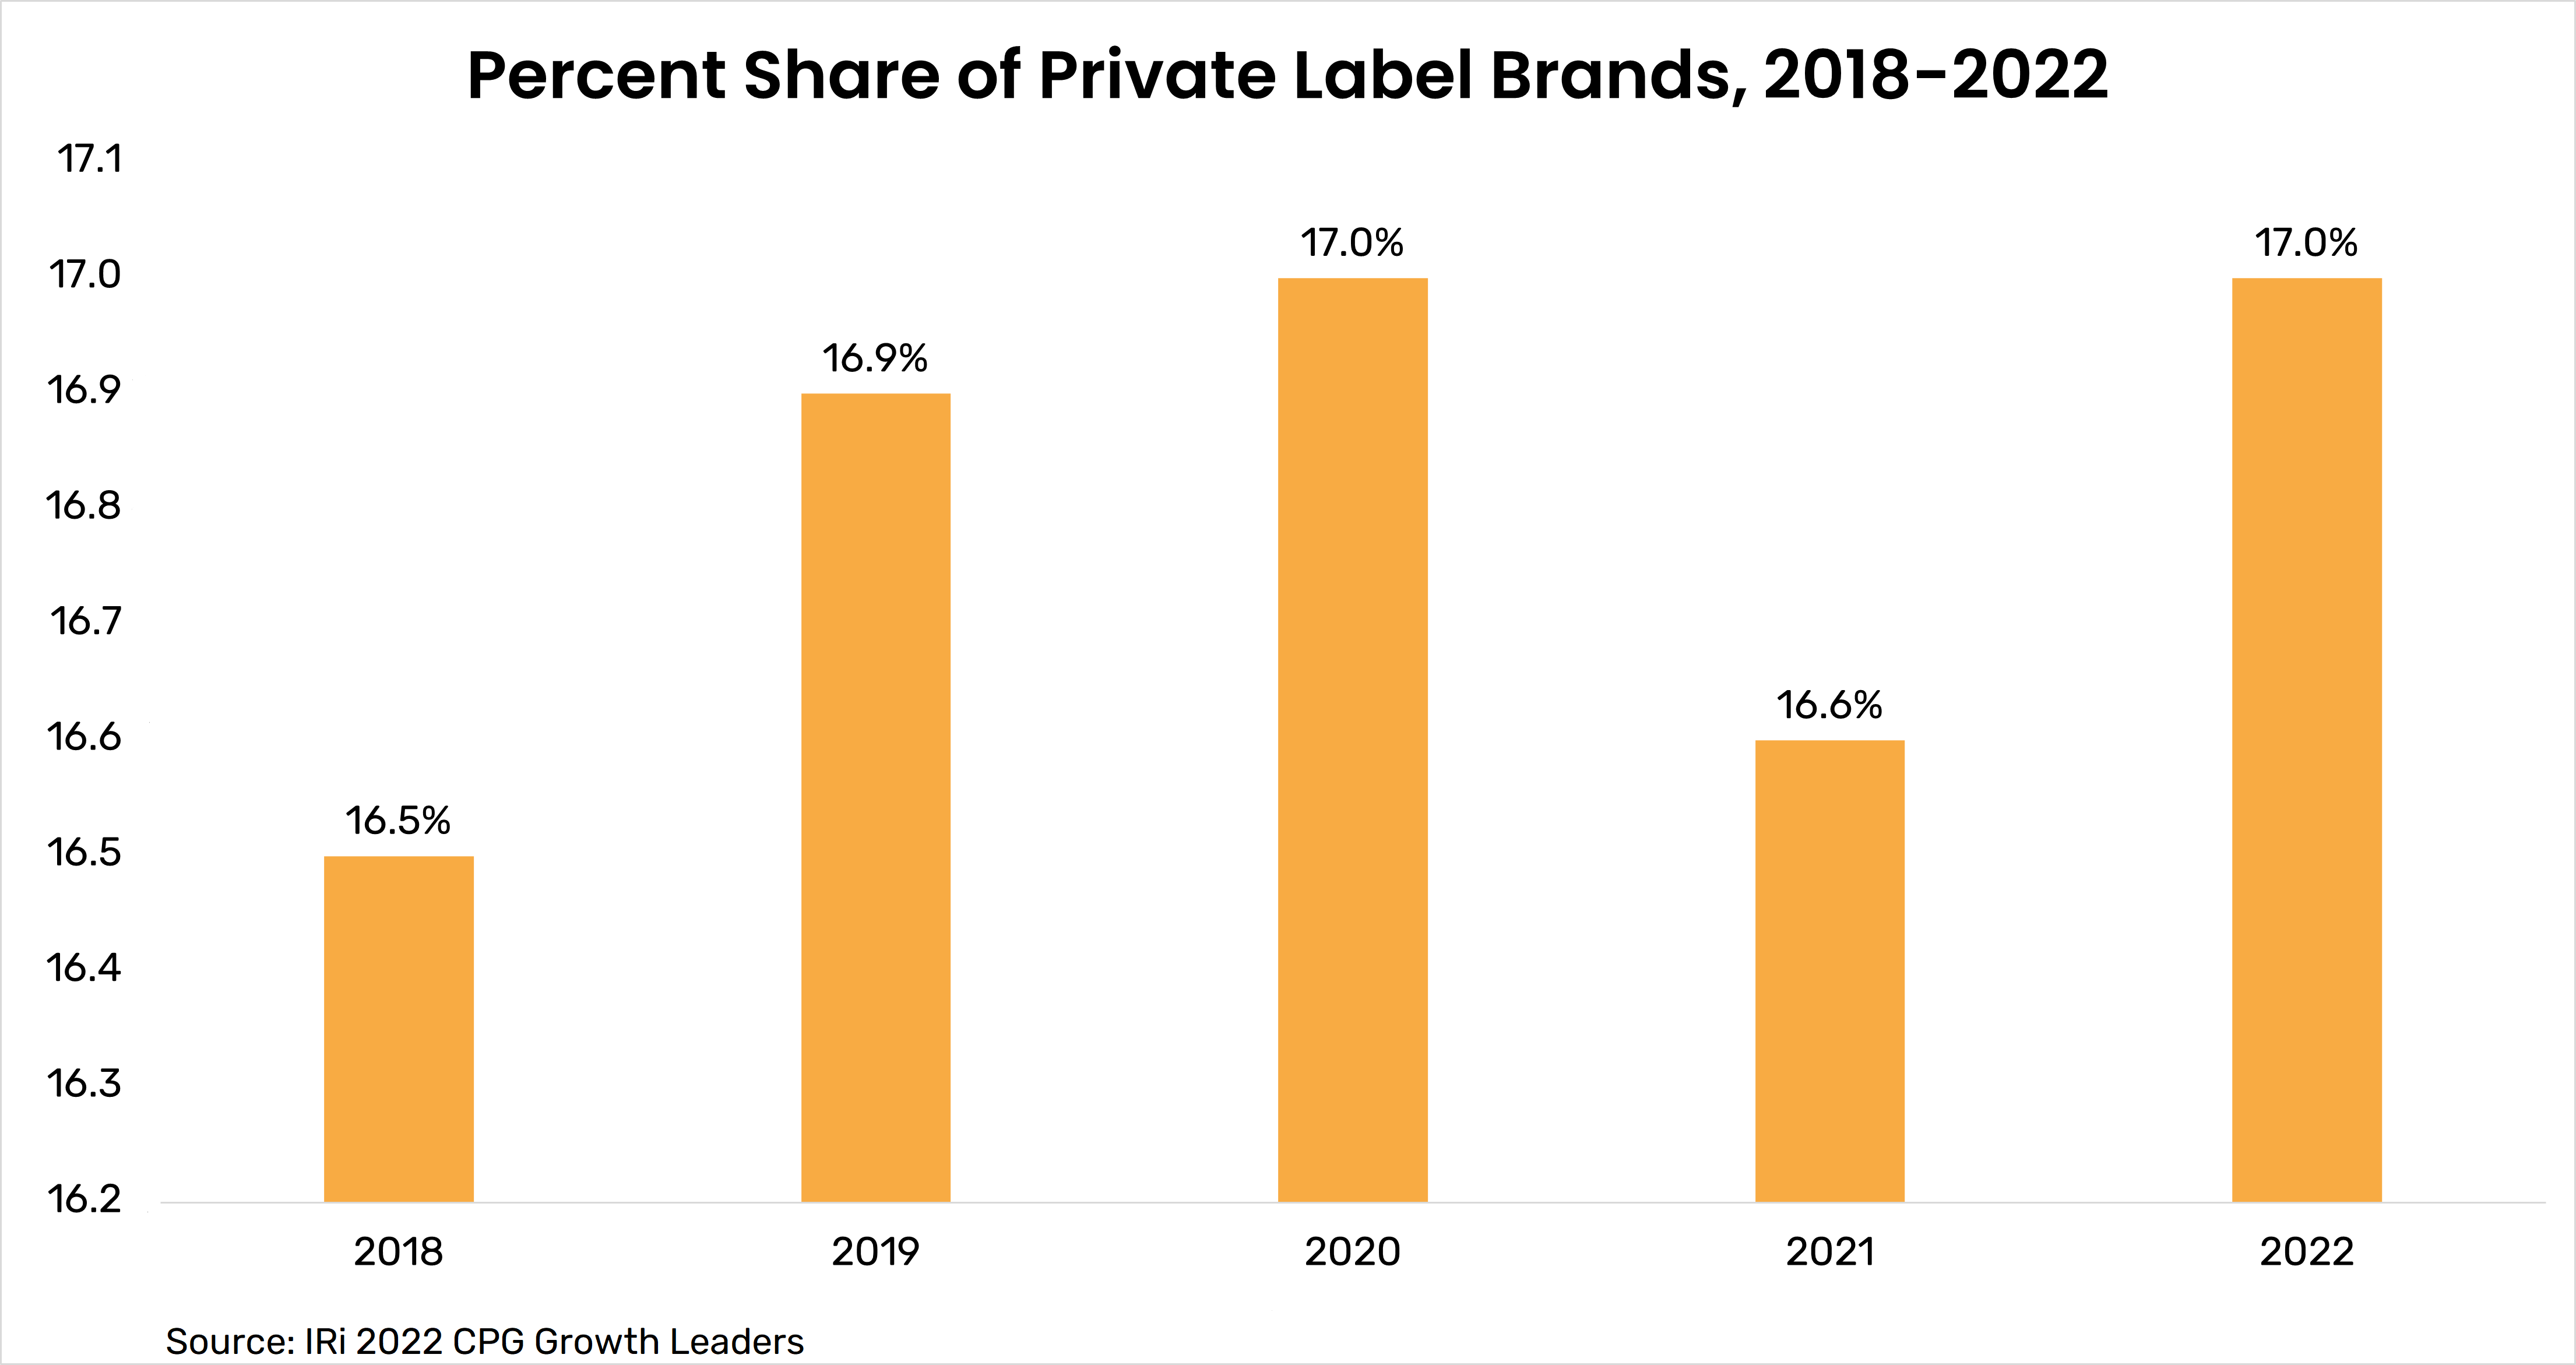 MetricsCart chart showing percent share of private label brands, 2018-22